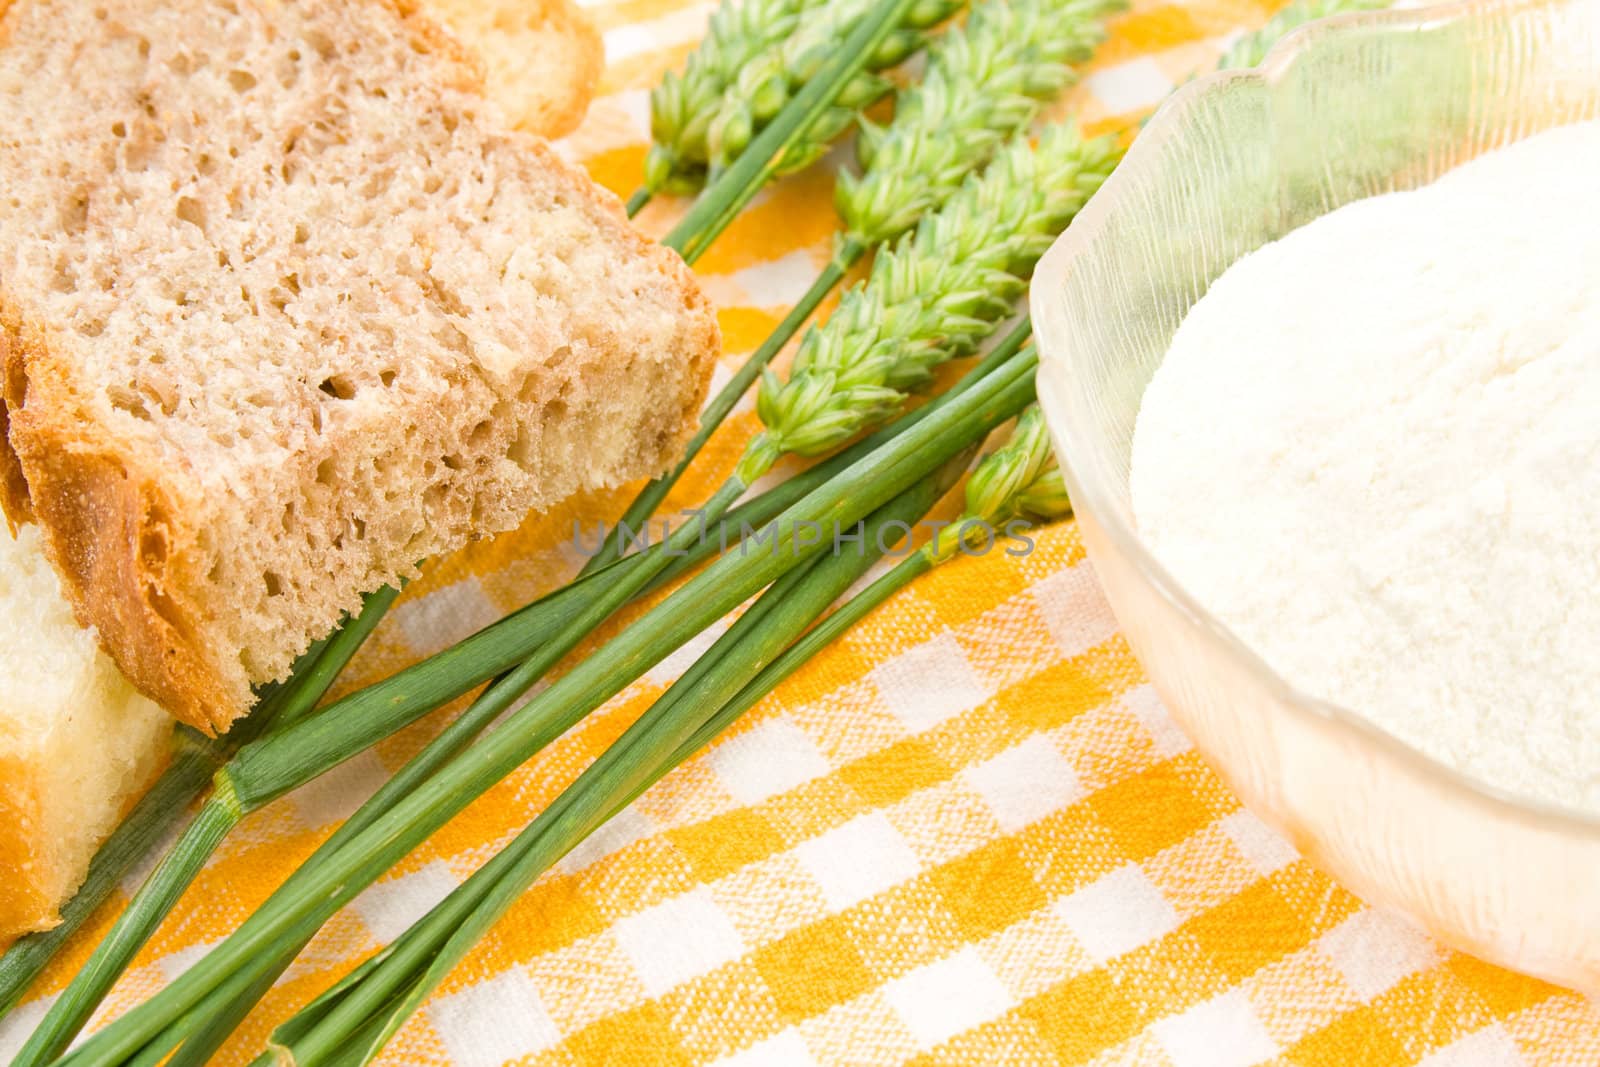 Bread, flour and green wheat on table cover.